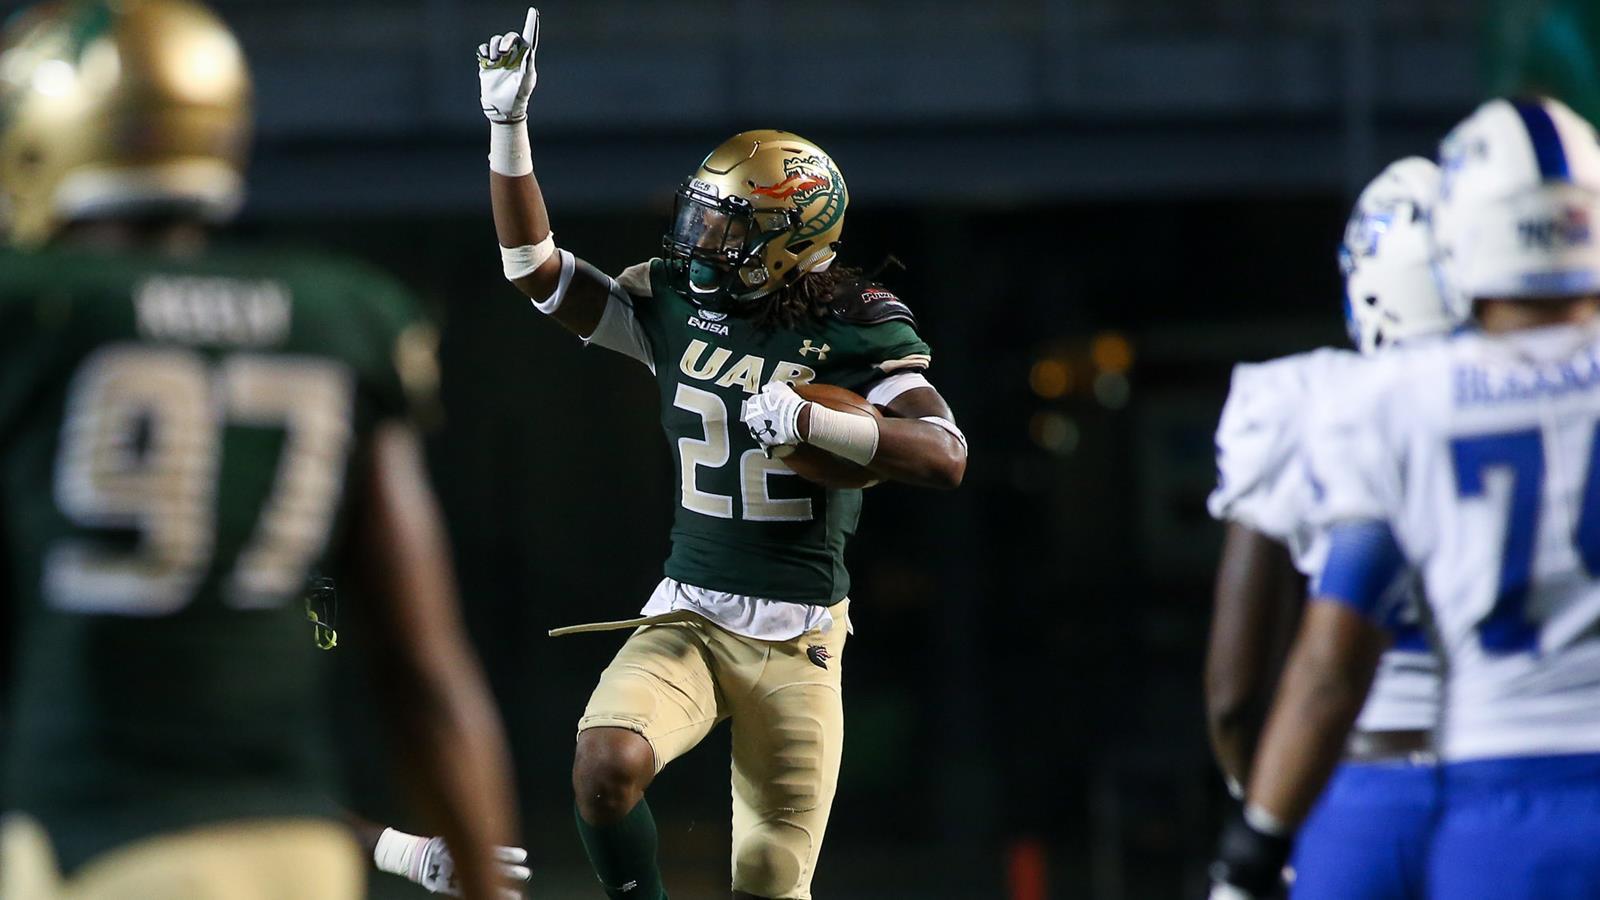 UAB Football Travels to Charlotte for Road Test